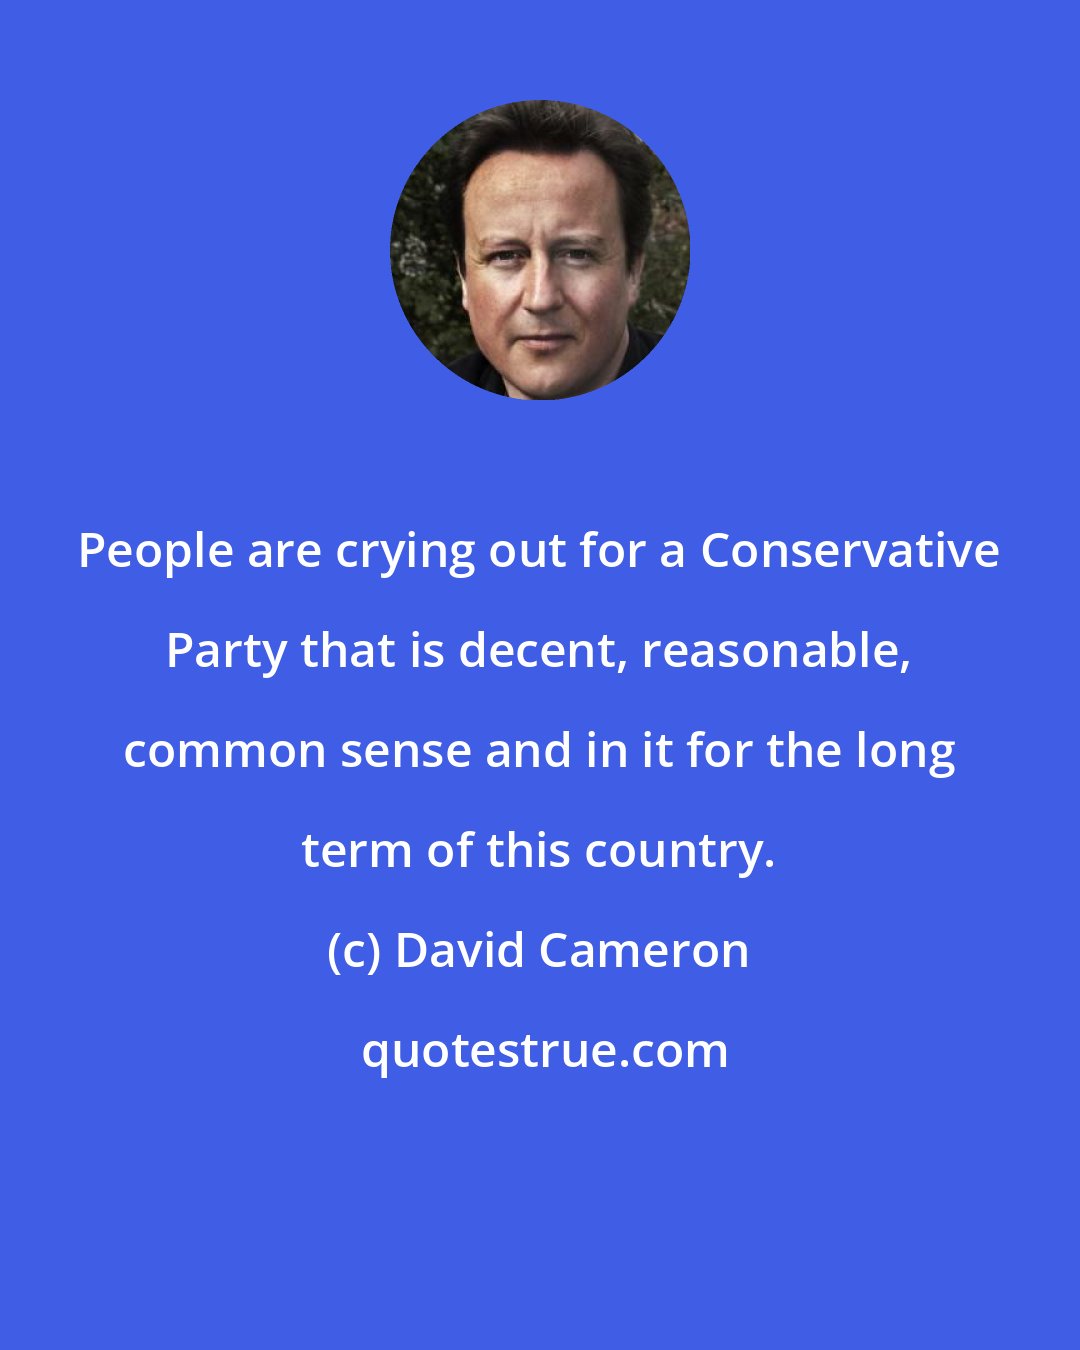 David Cameron: People are crying out for a Conservative Party that is decent, reasonable, common sense and in it for the long term of this country.